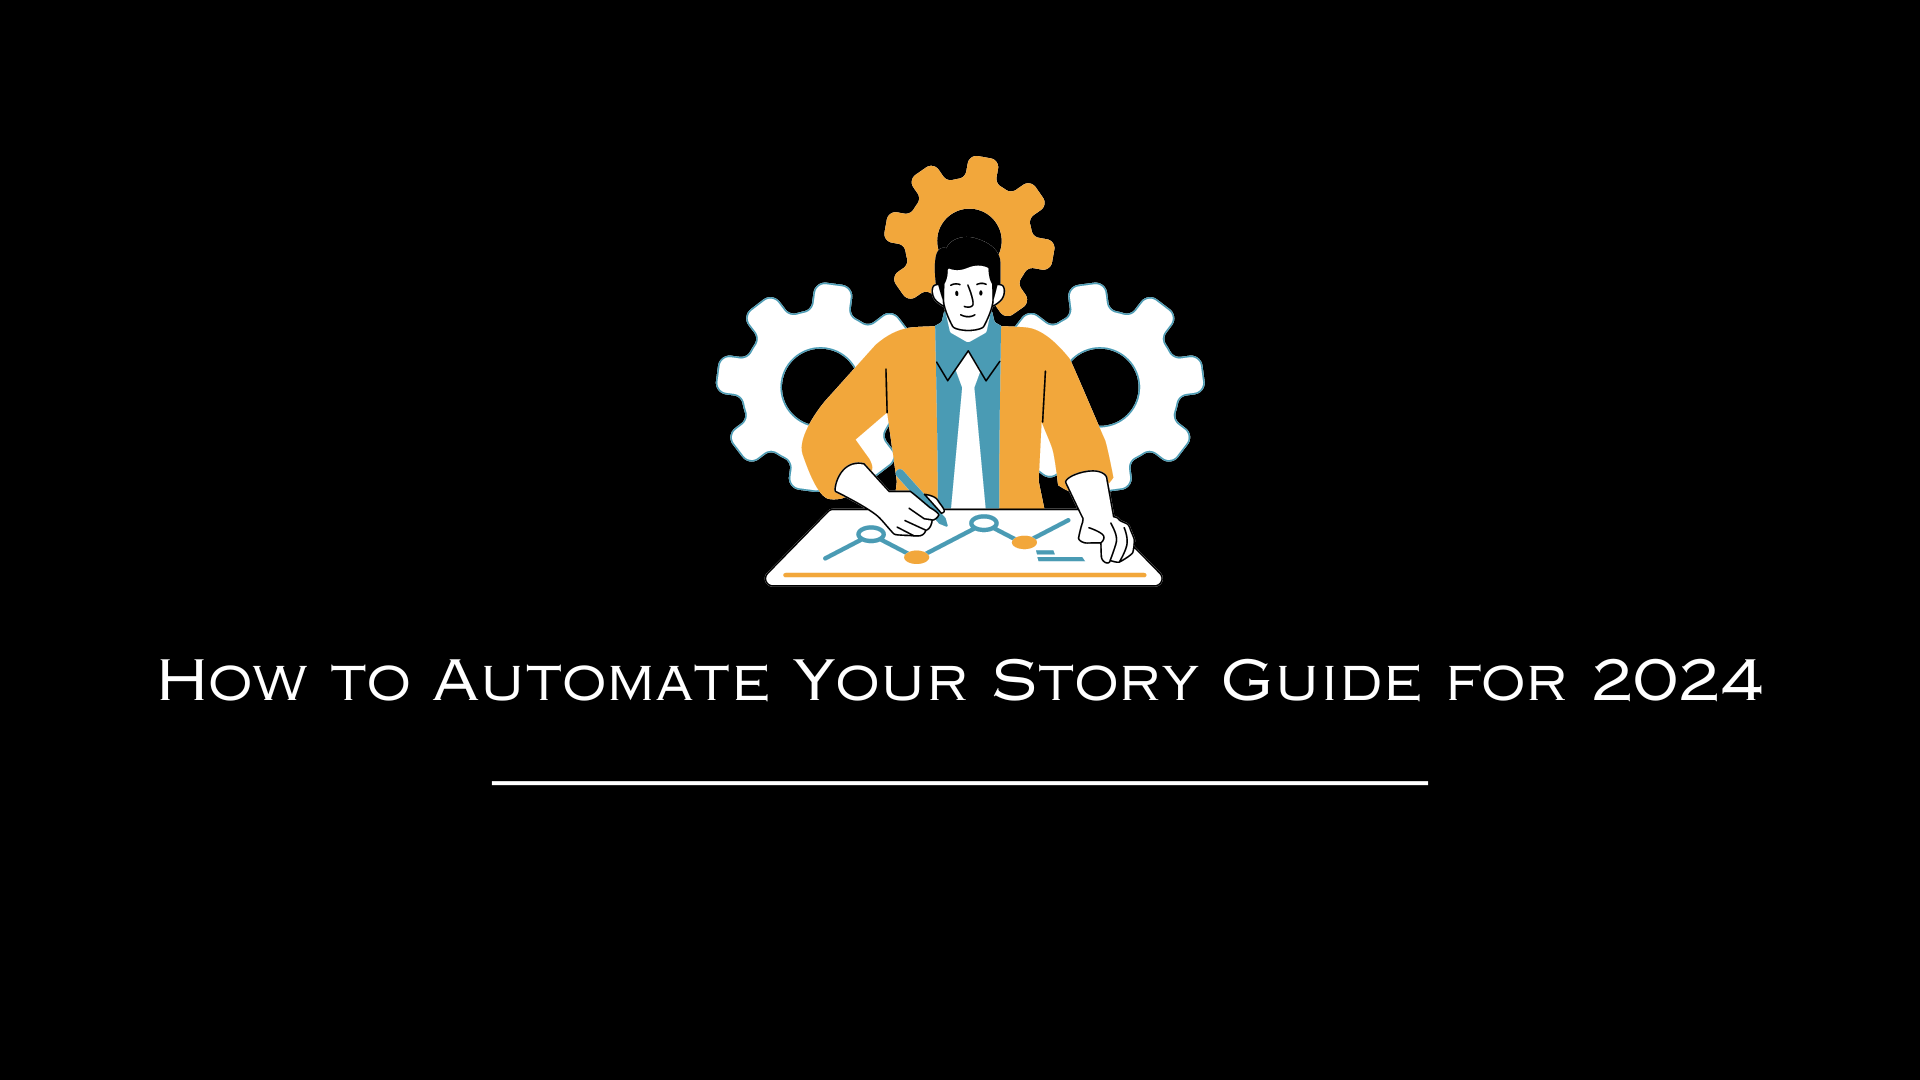 How to Automate Your Story Guide for 2024